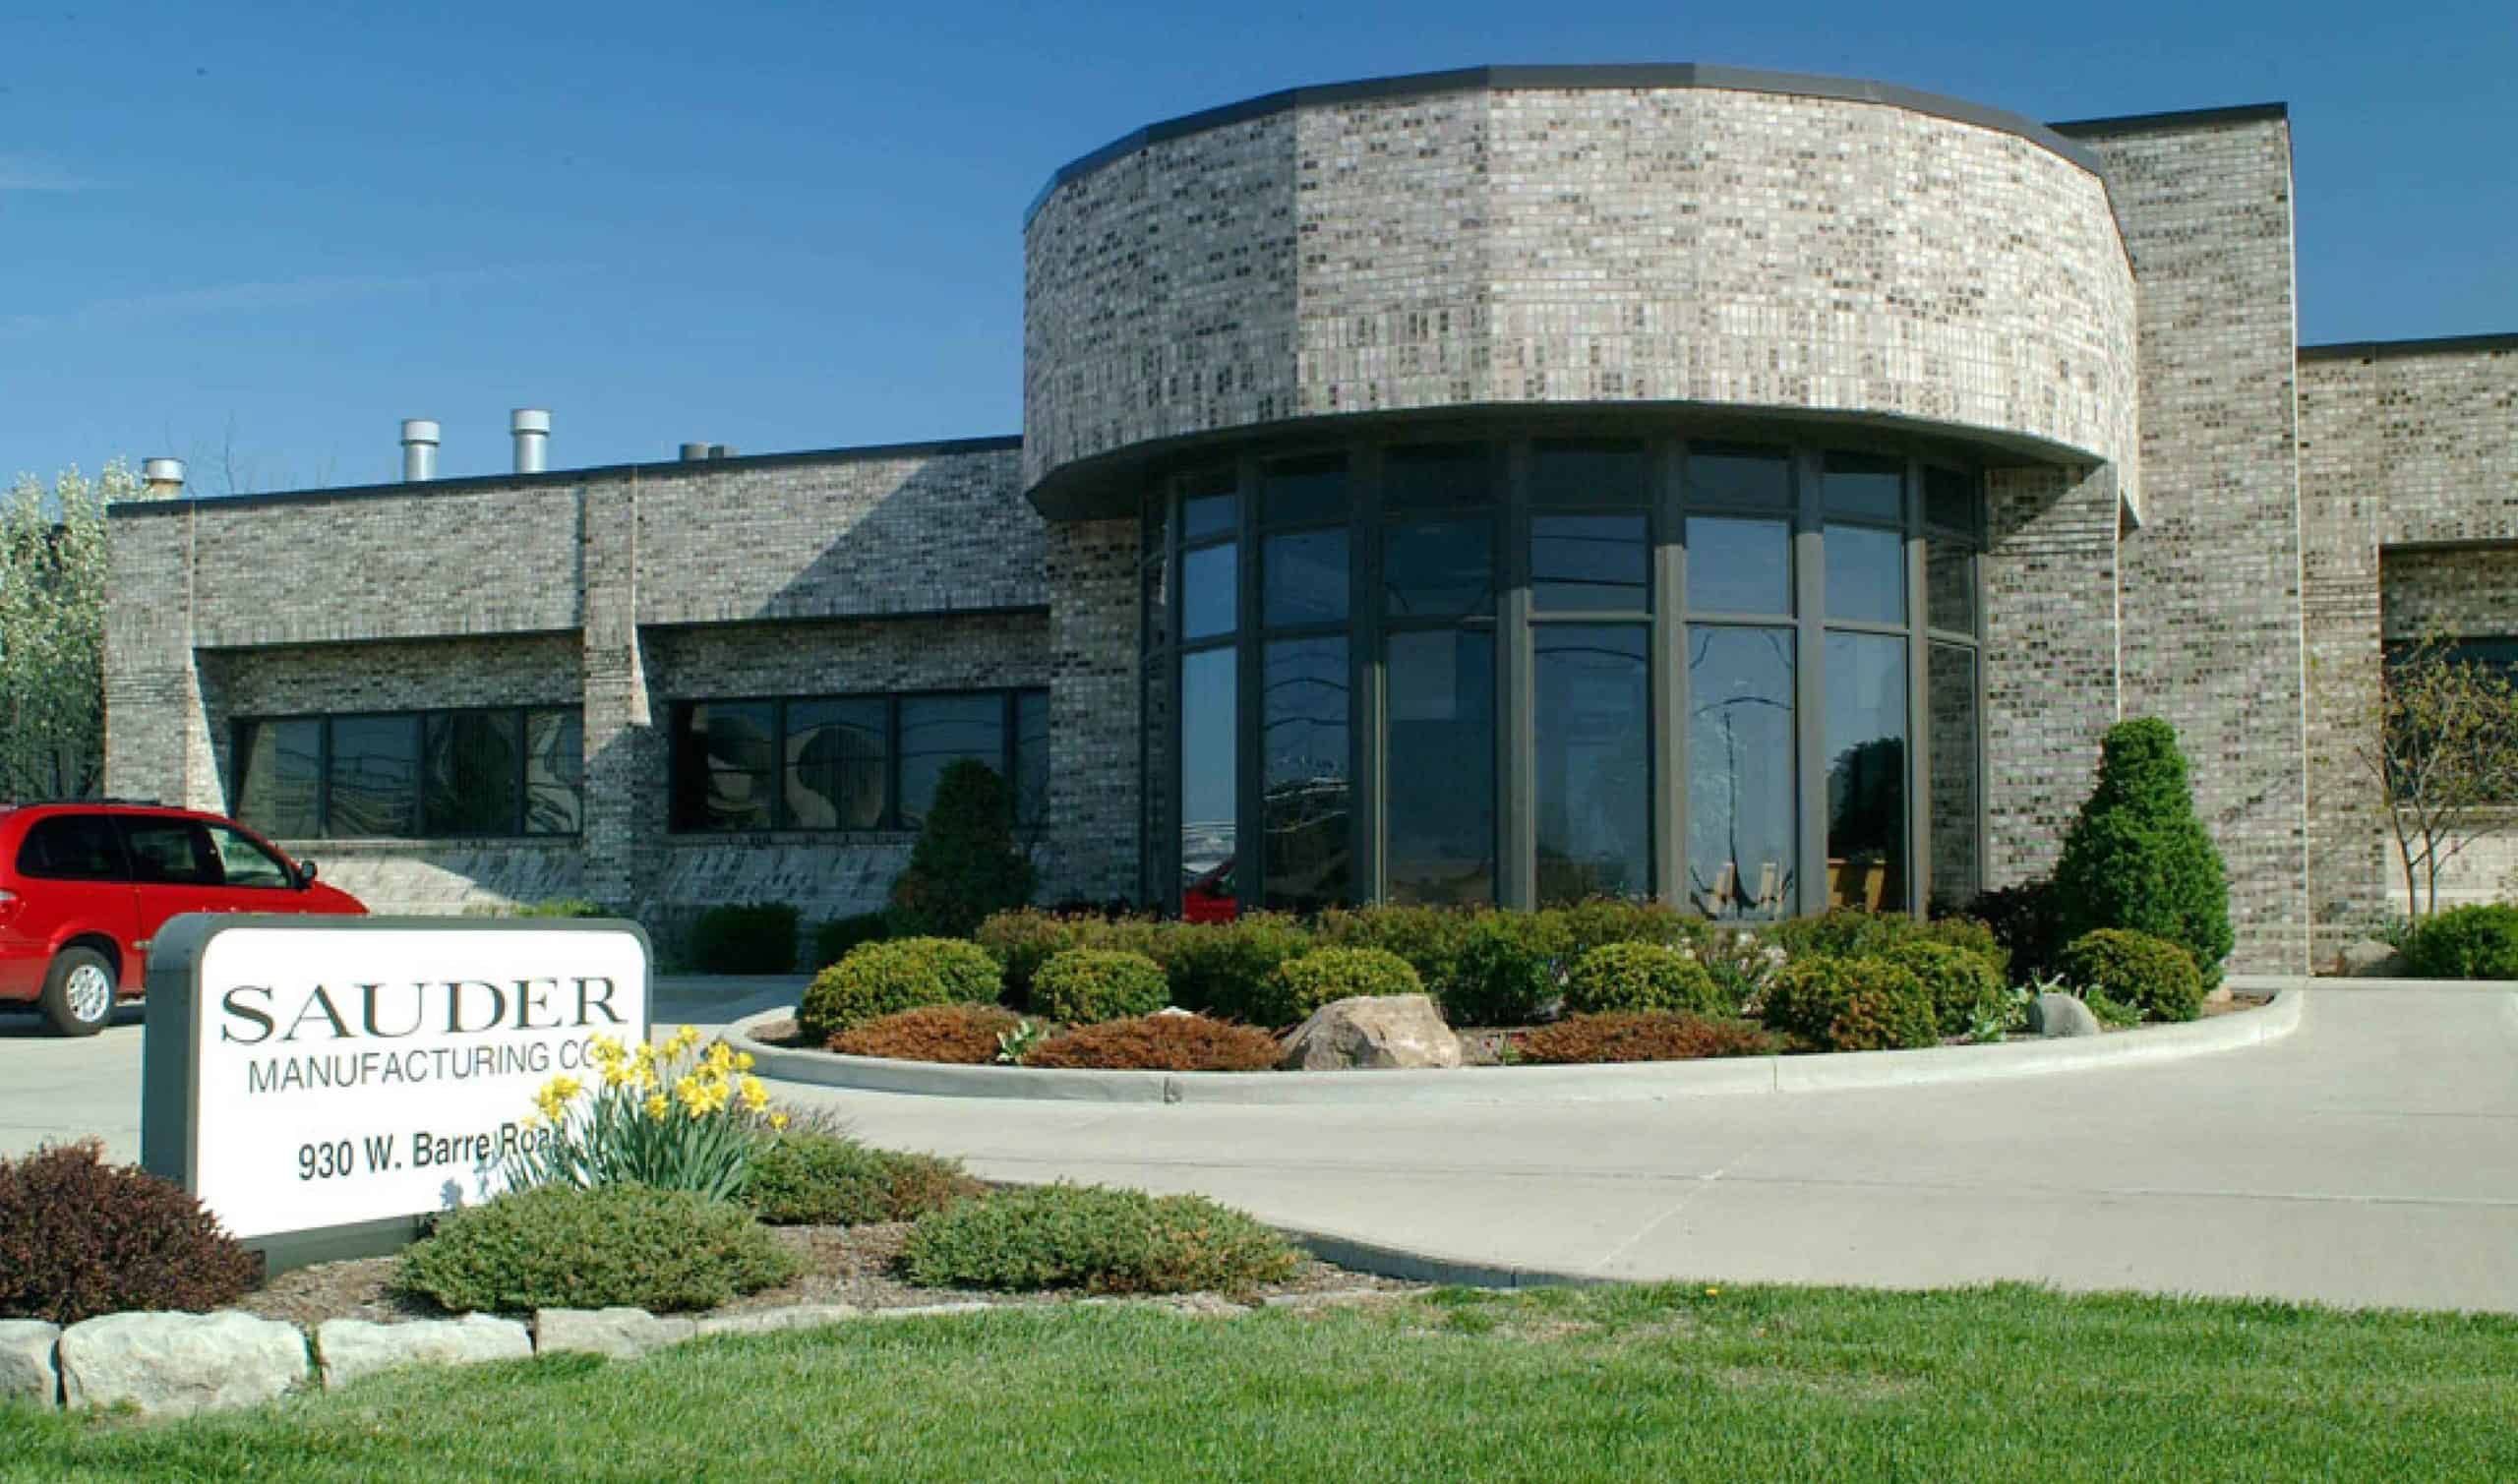 Sauder Manufacturing Company office in Archbold, Ohio